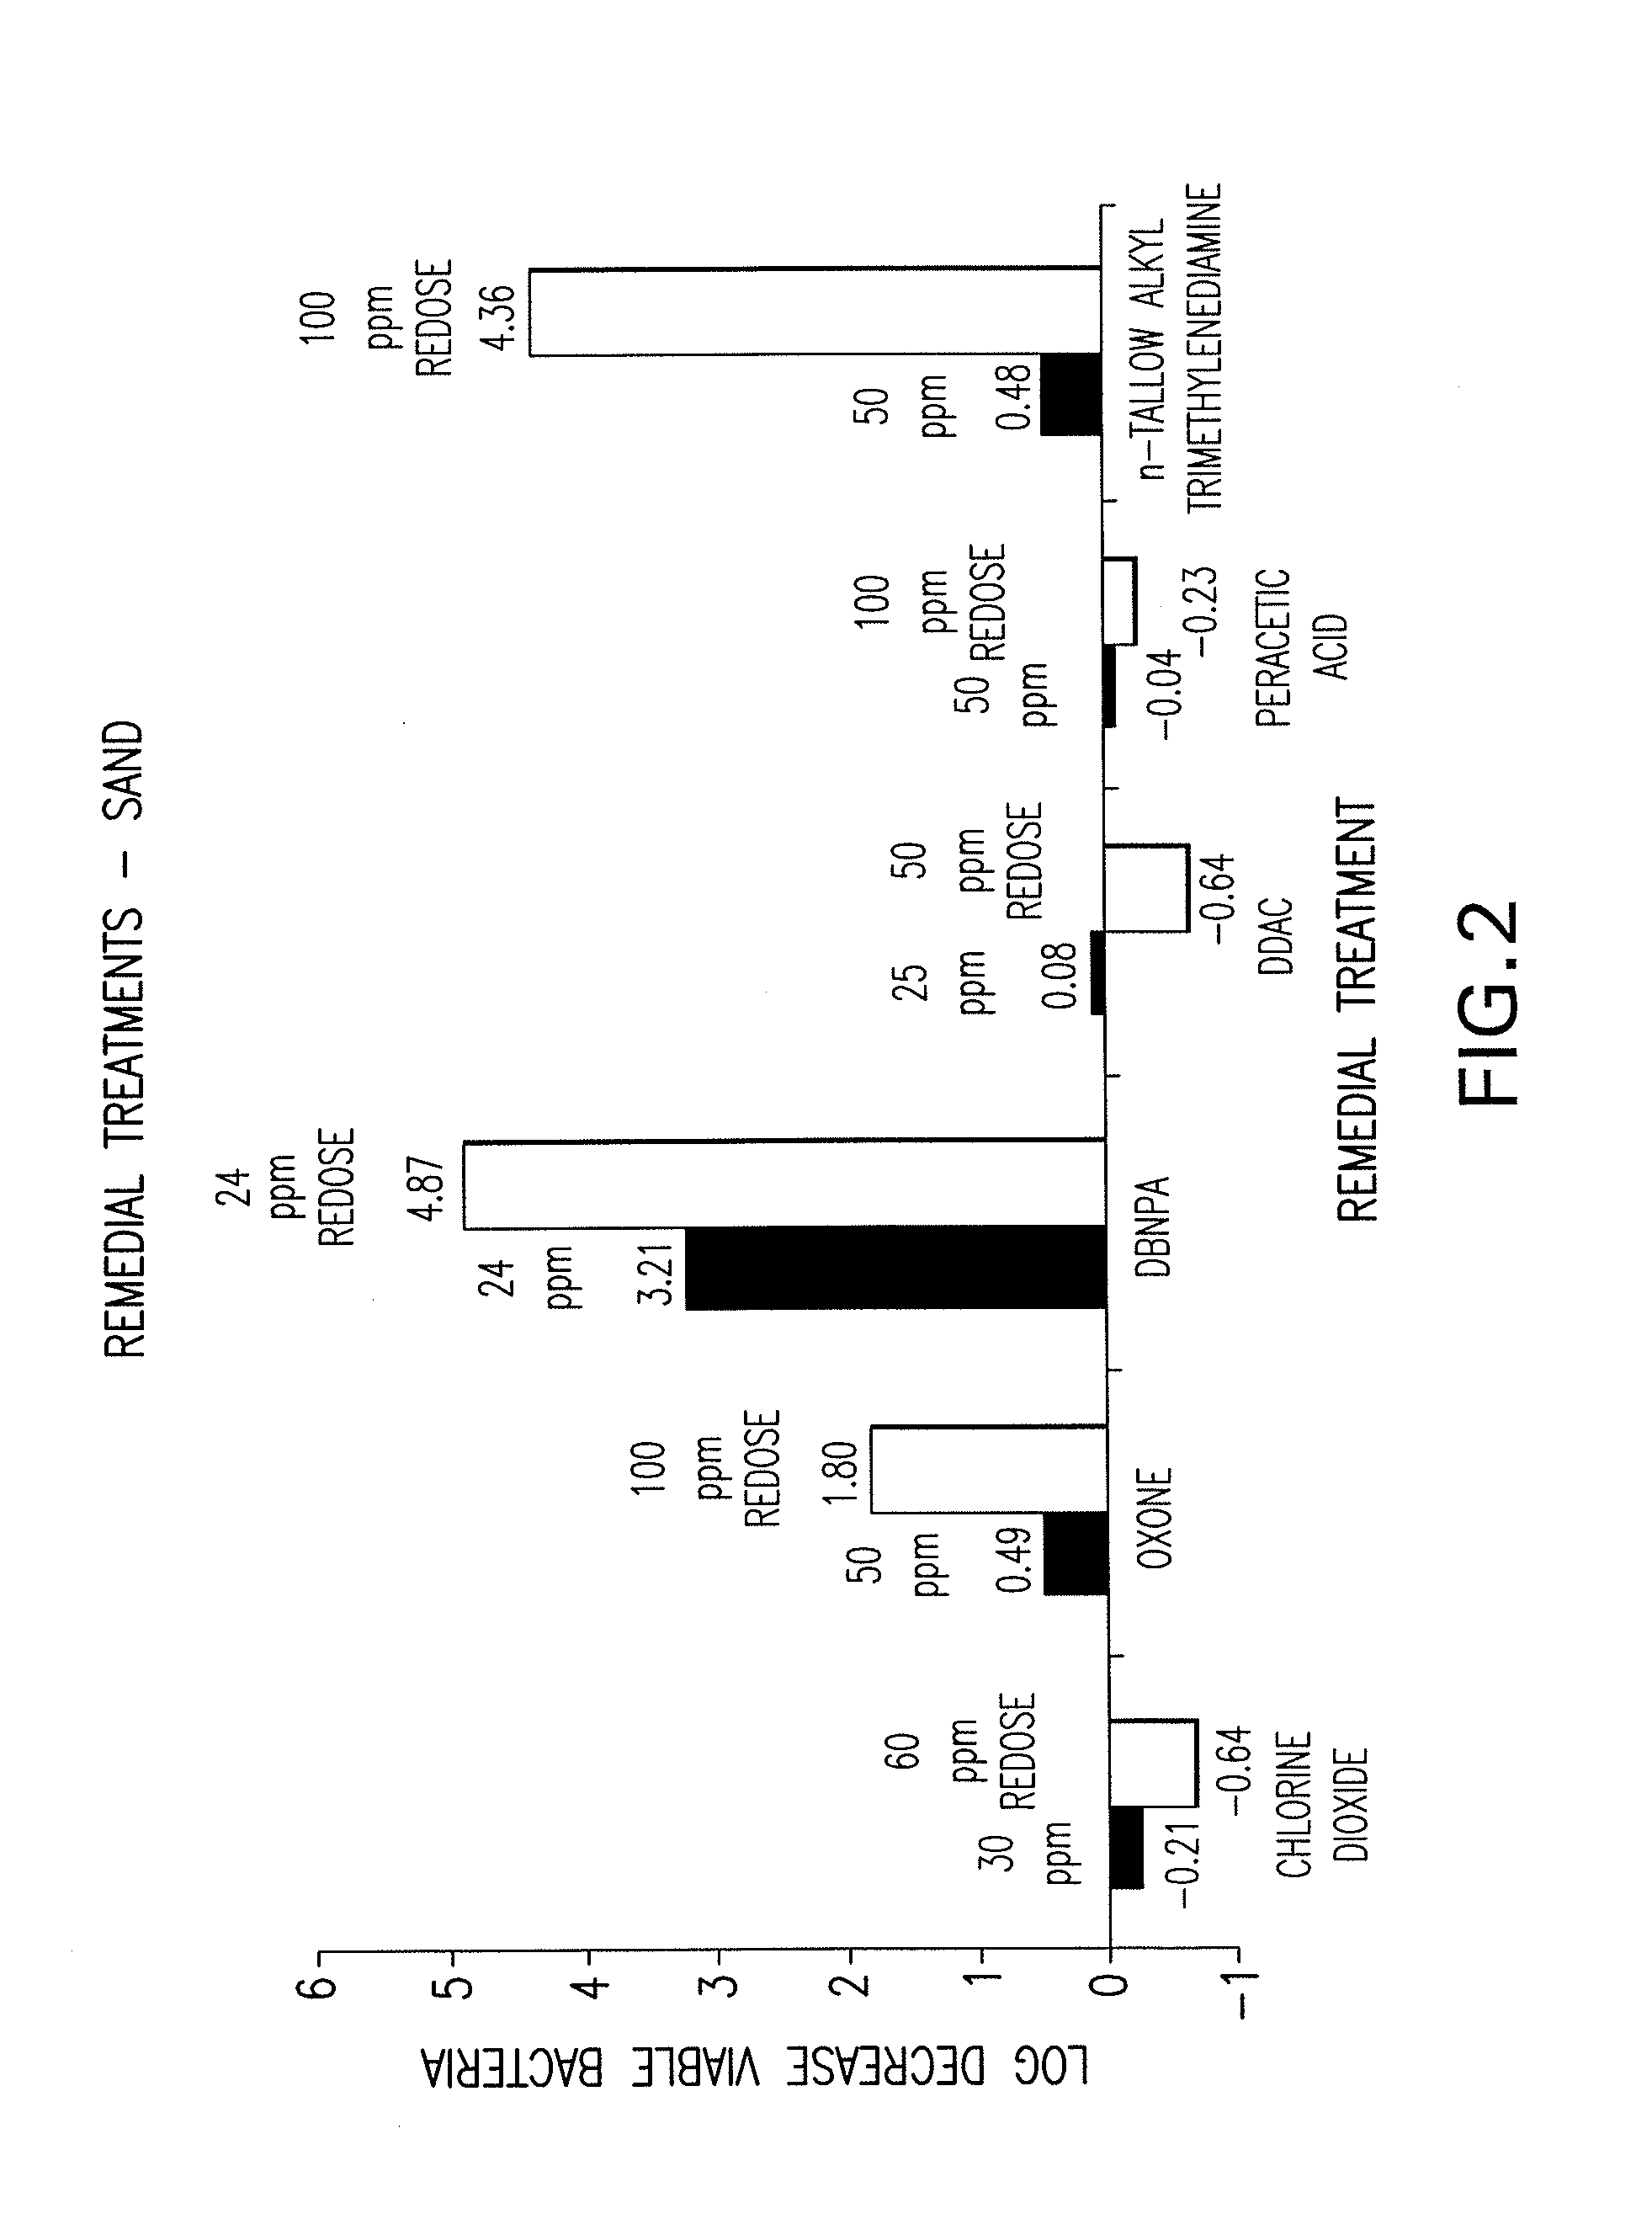 Biocidal composition and method for treating recirculating water systems